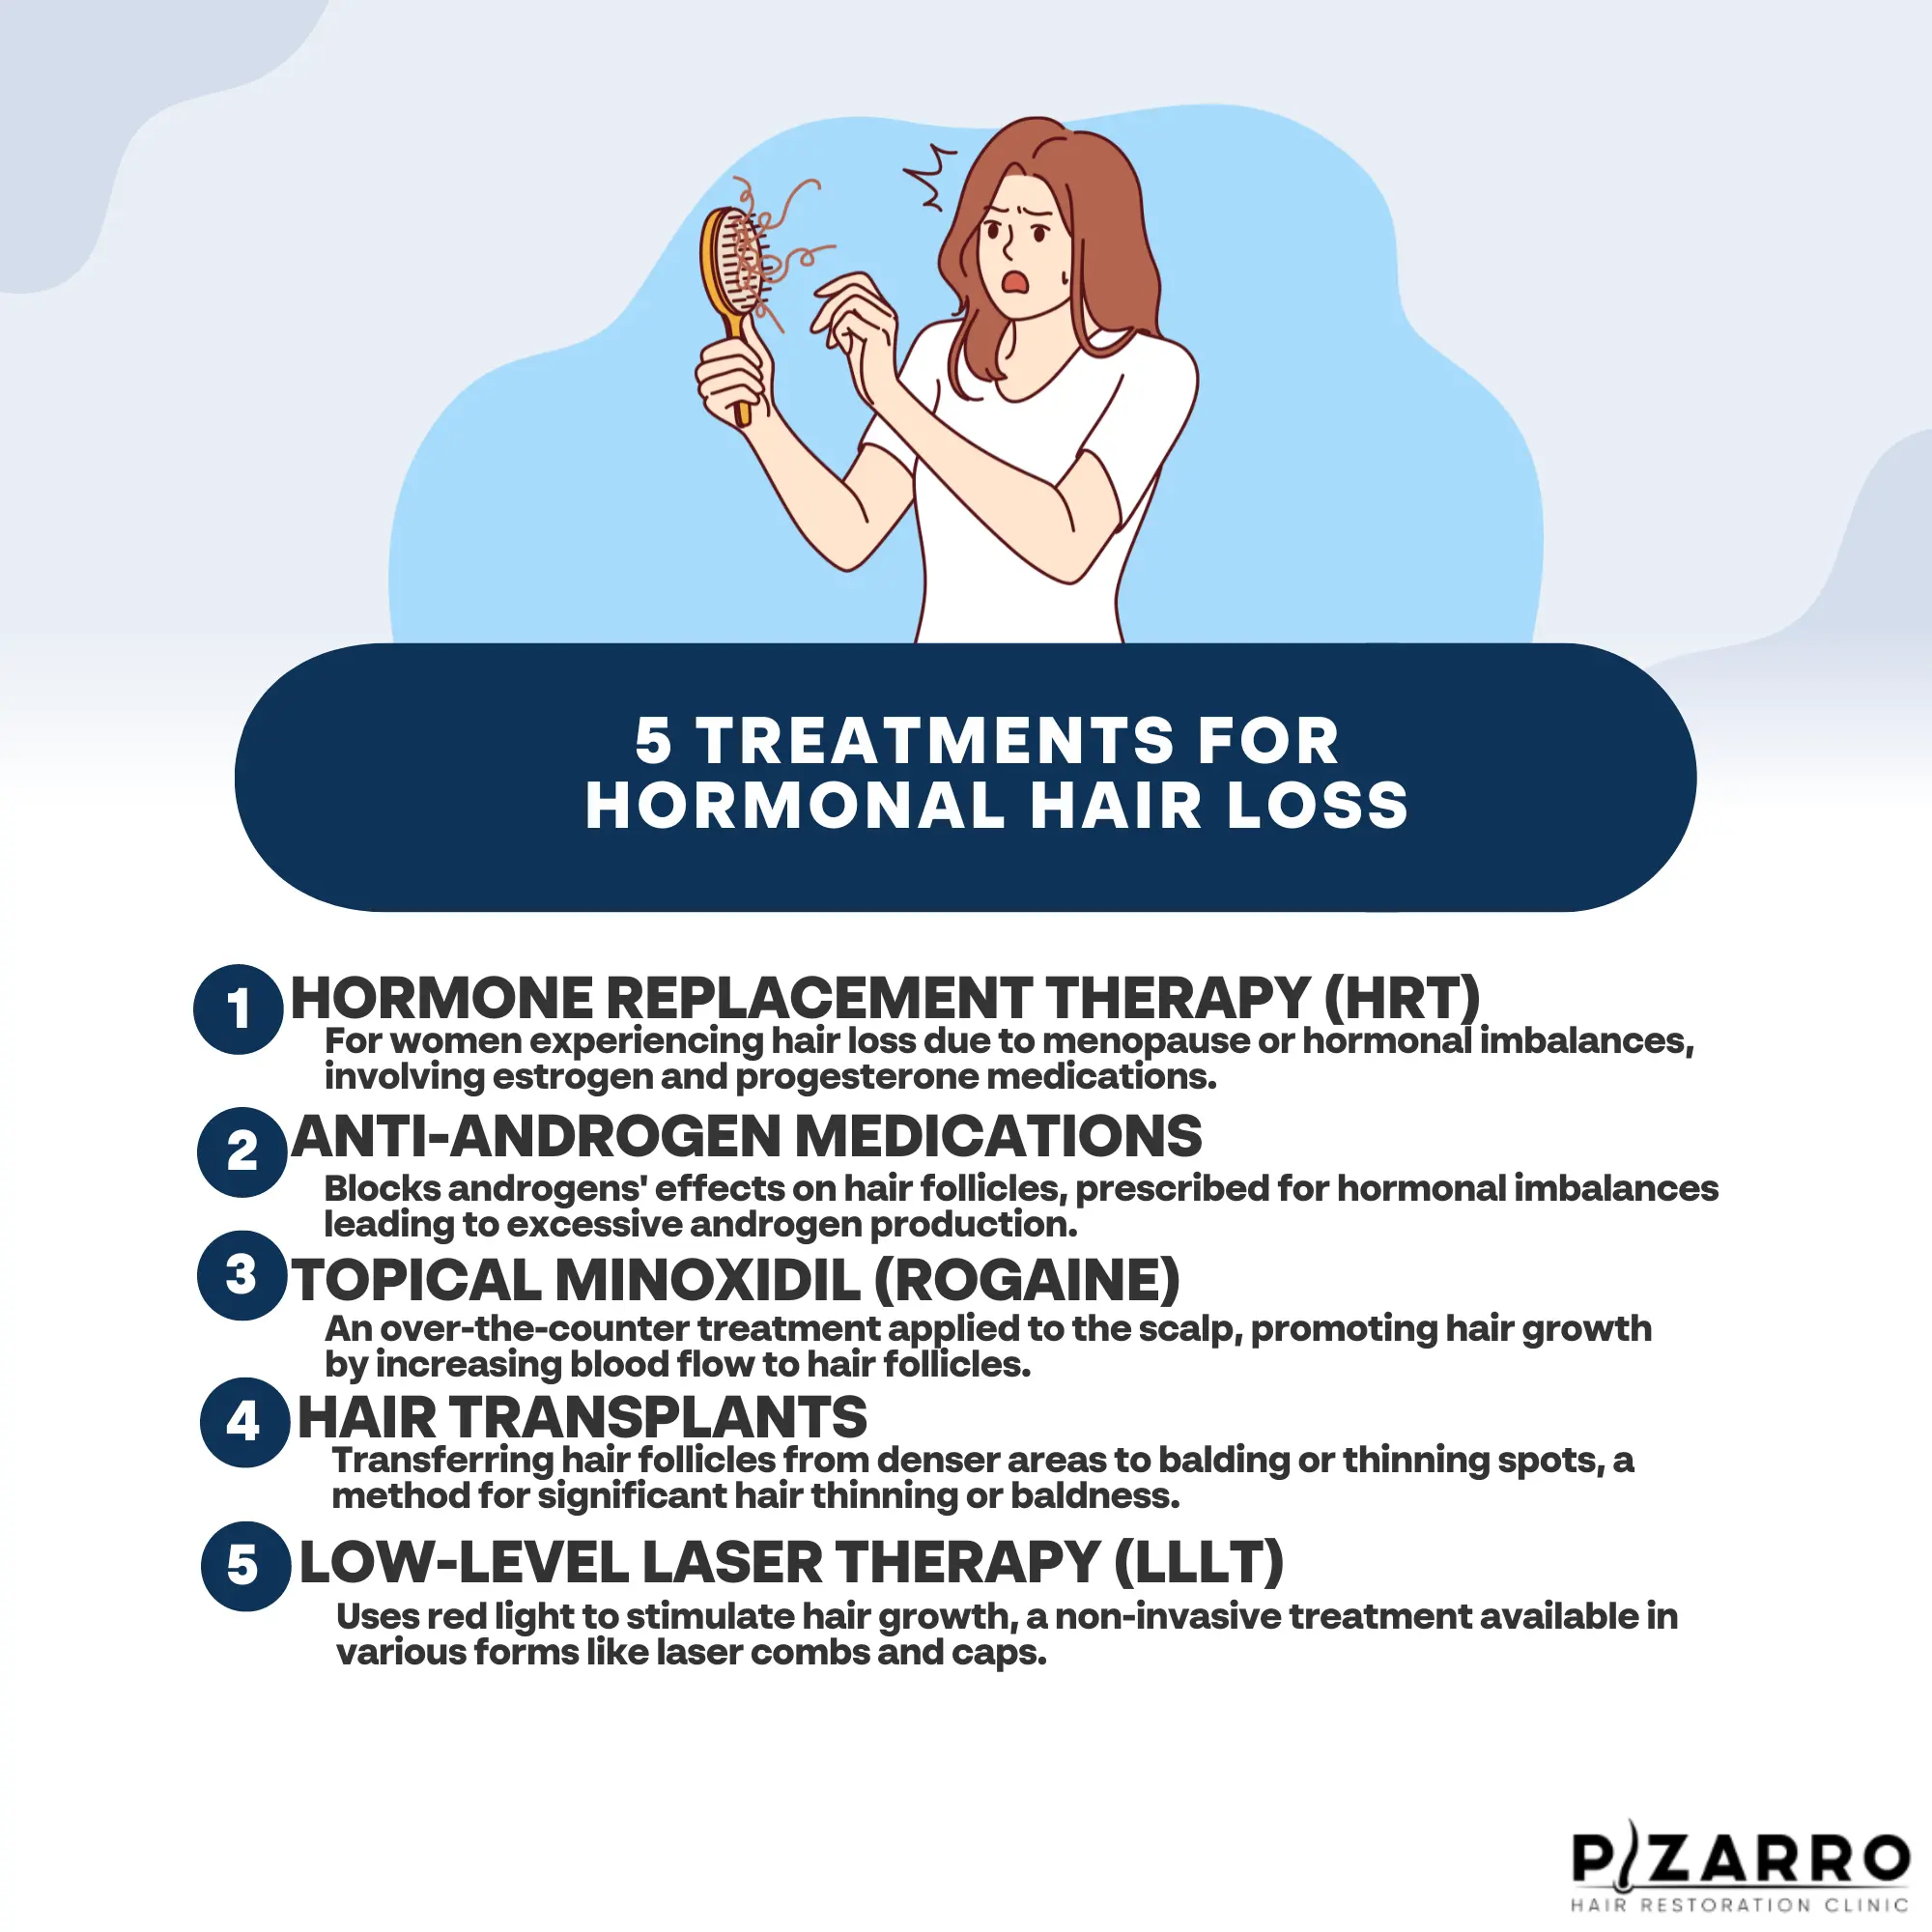 treatment options for hair loss caused by hormonal imbalance | PHR